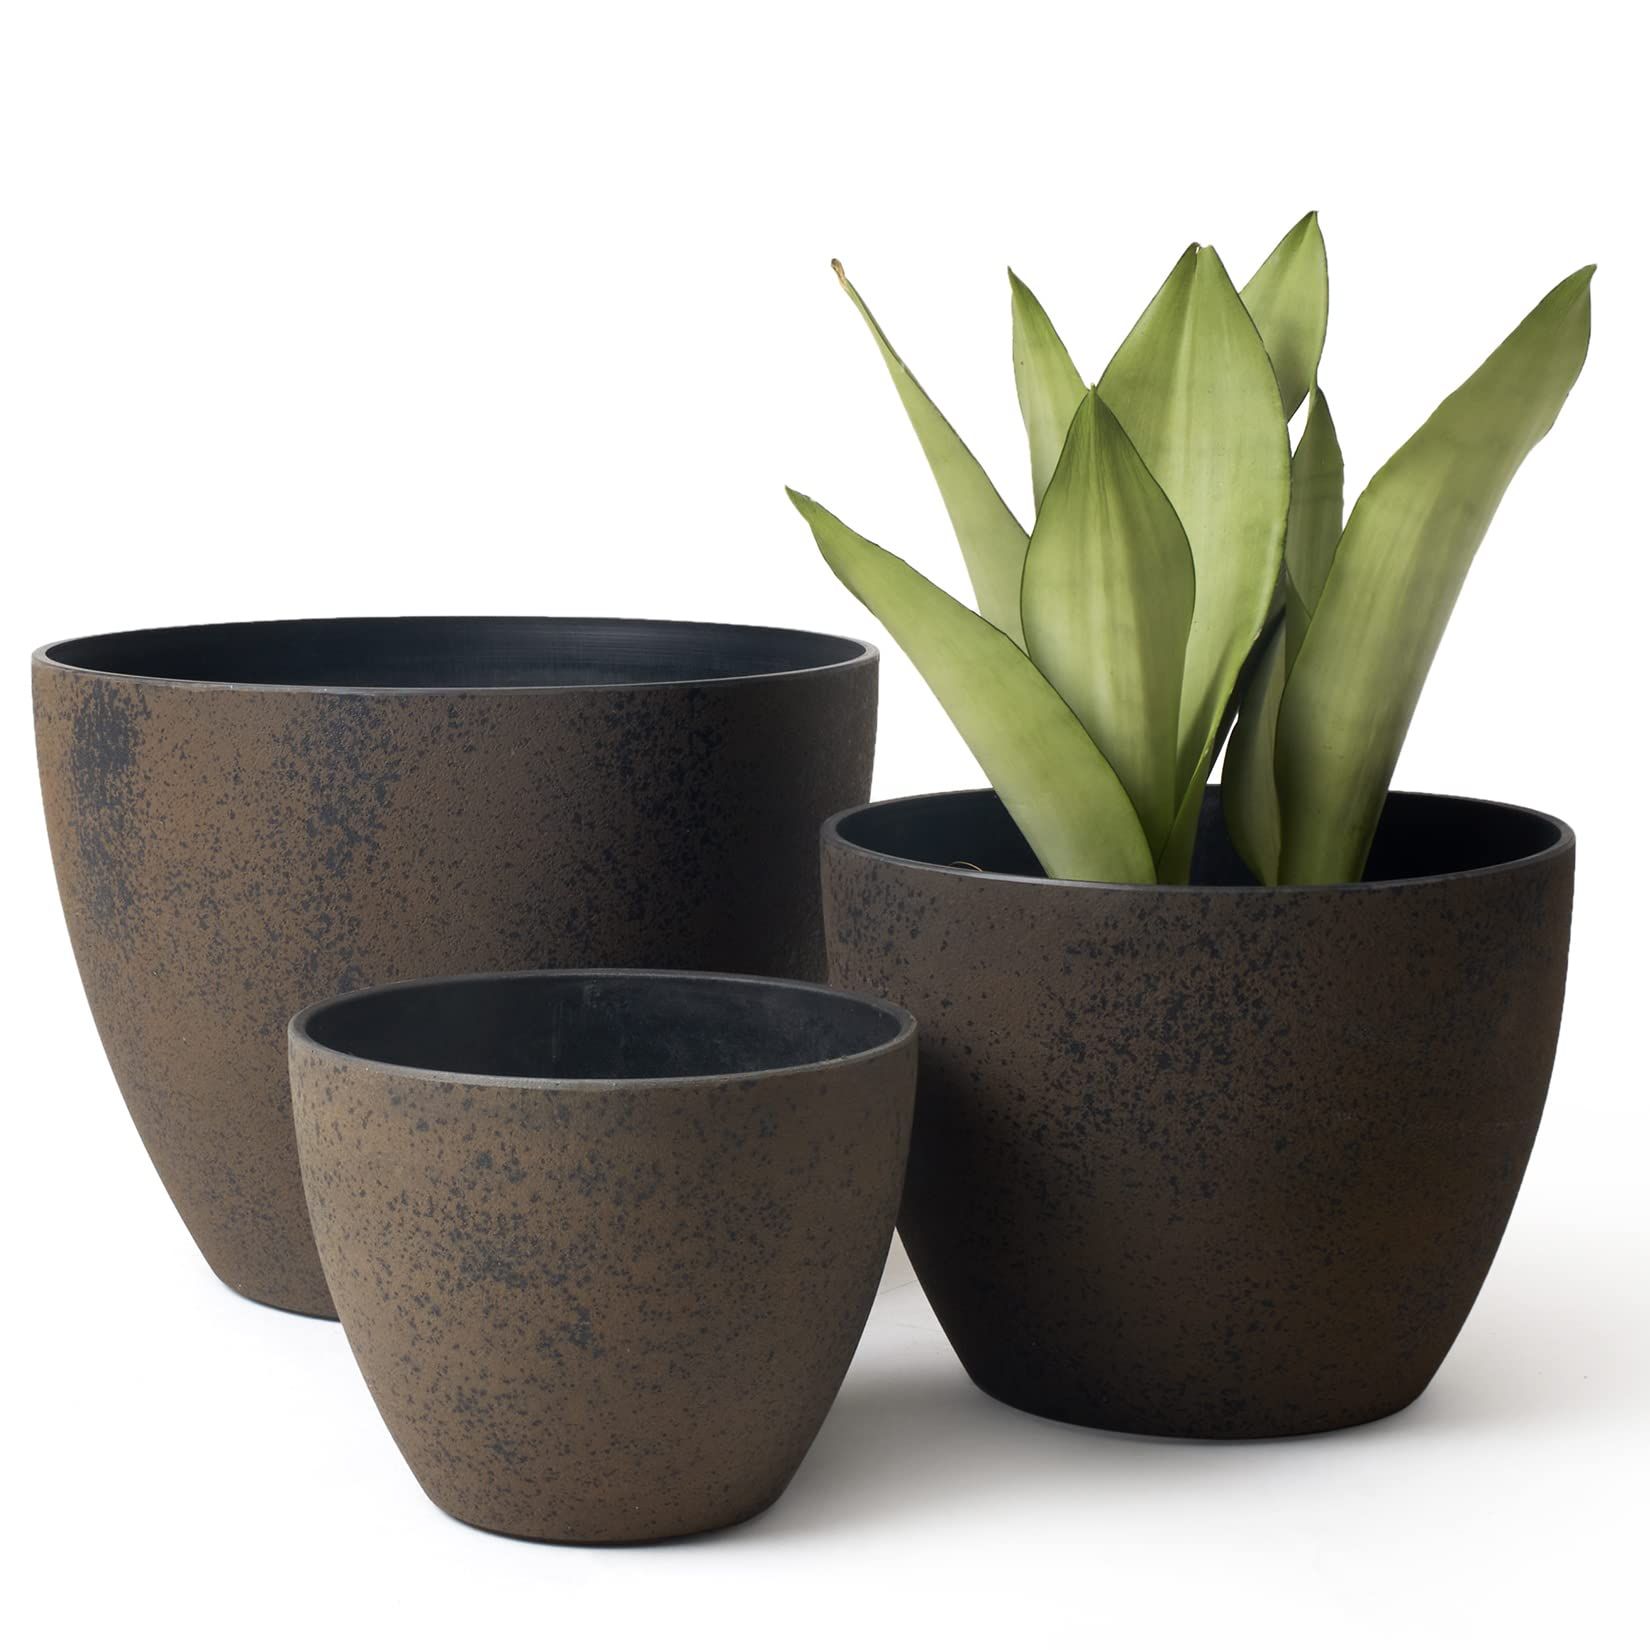 LA JOLIE MUSE 14.2/11.3/8.6 Inch Large Planters,Indoor/Outdoor Round Planters Set of 3,New Iron Plant Container with Drain Holes,Tree Flower Plant Pots for Patio and Deck | Amazon (US)